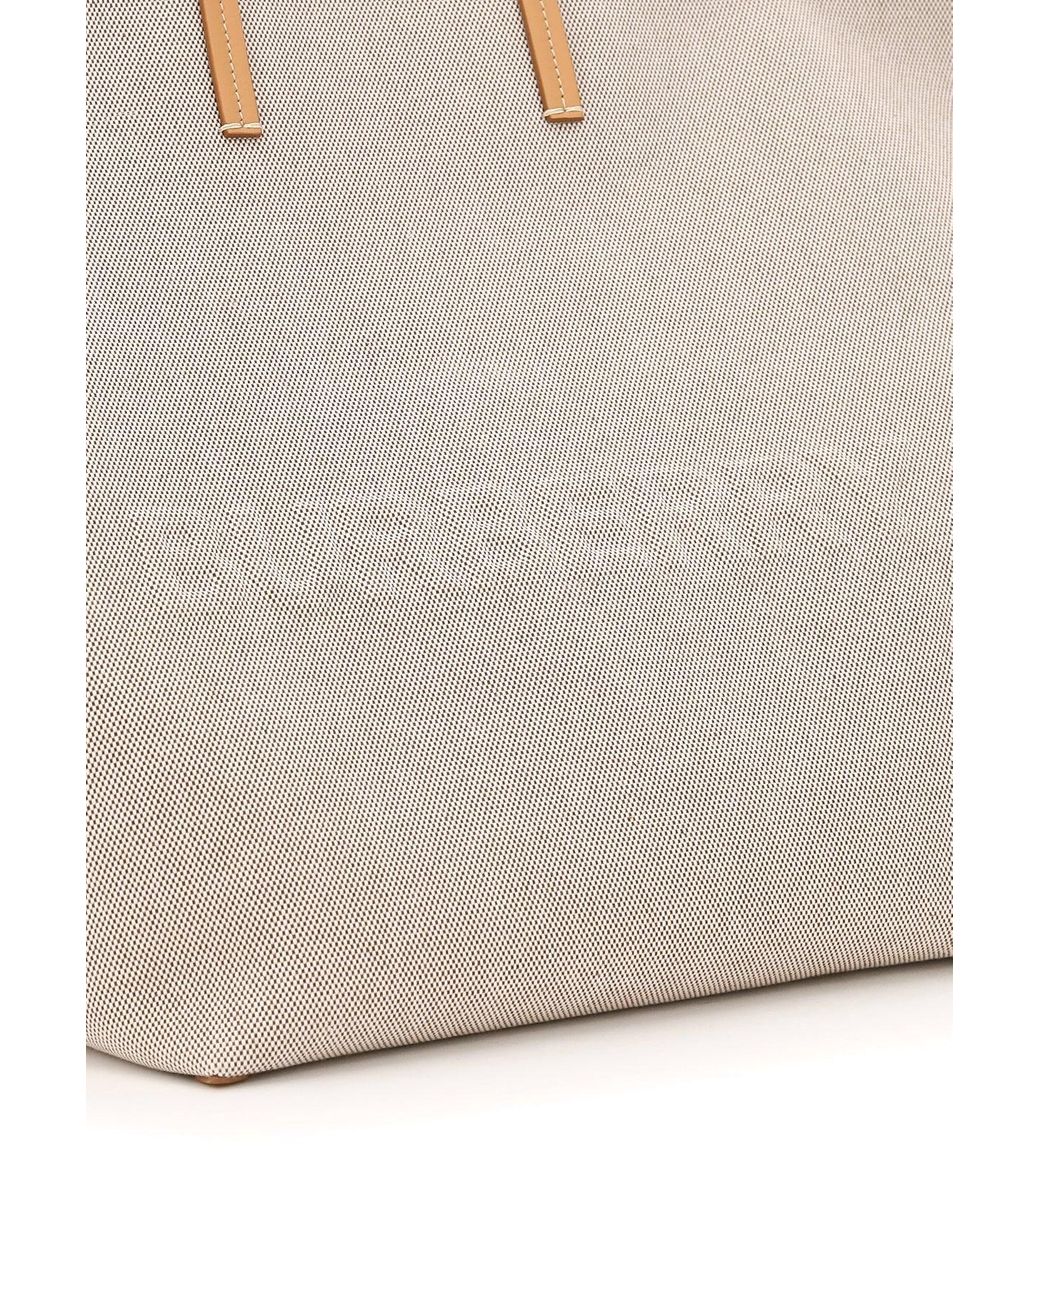 Authentic Burberry embossed xl beach Logo Canvas tote